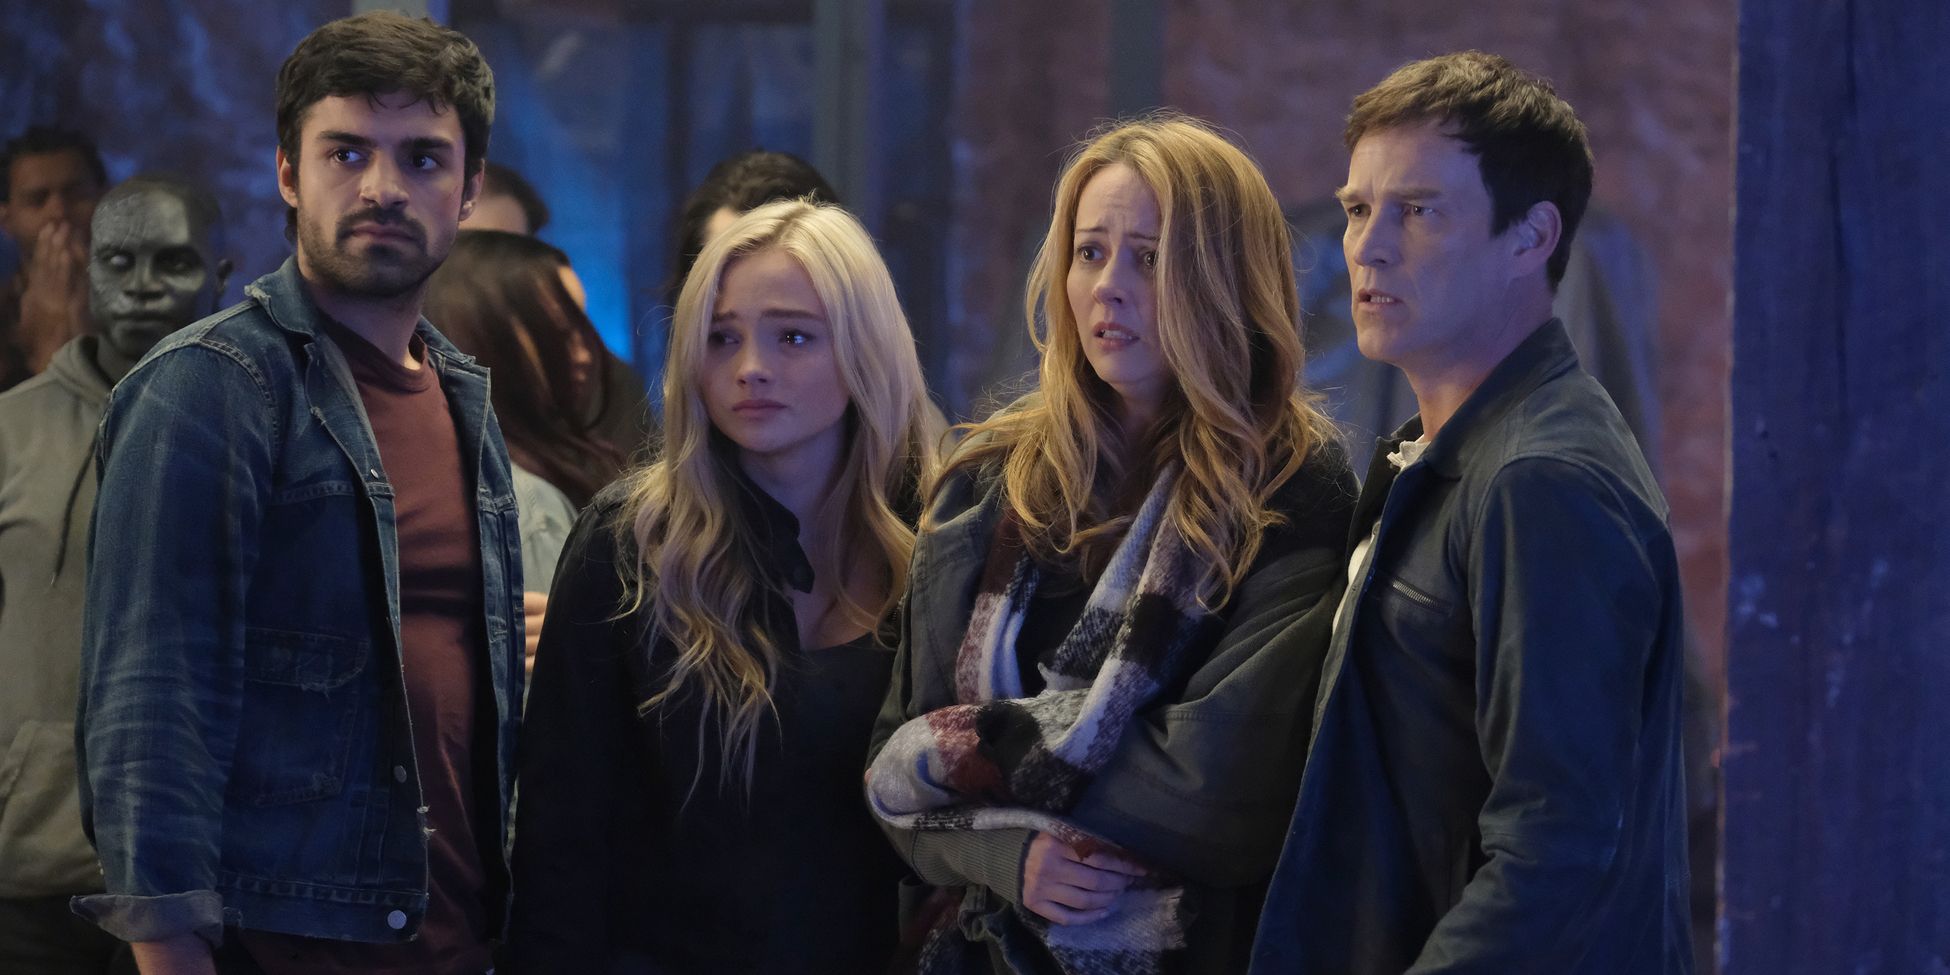 Sean Teale Natalie Alyn Lind Amy Acker and Stephen Moyer in The Gifted Season 1 Finale